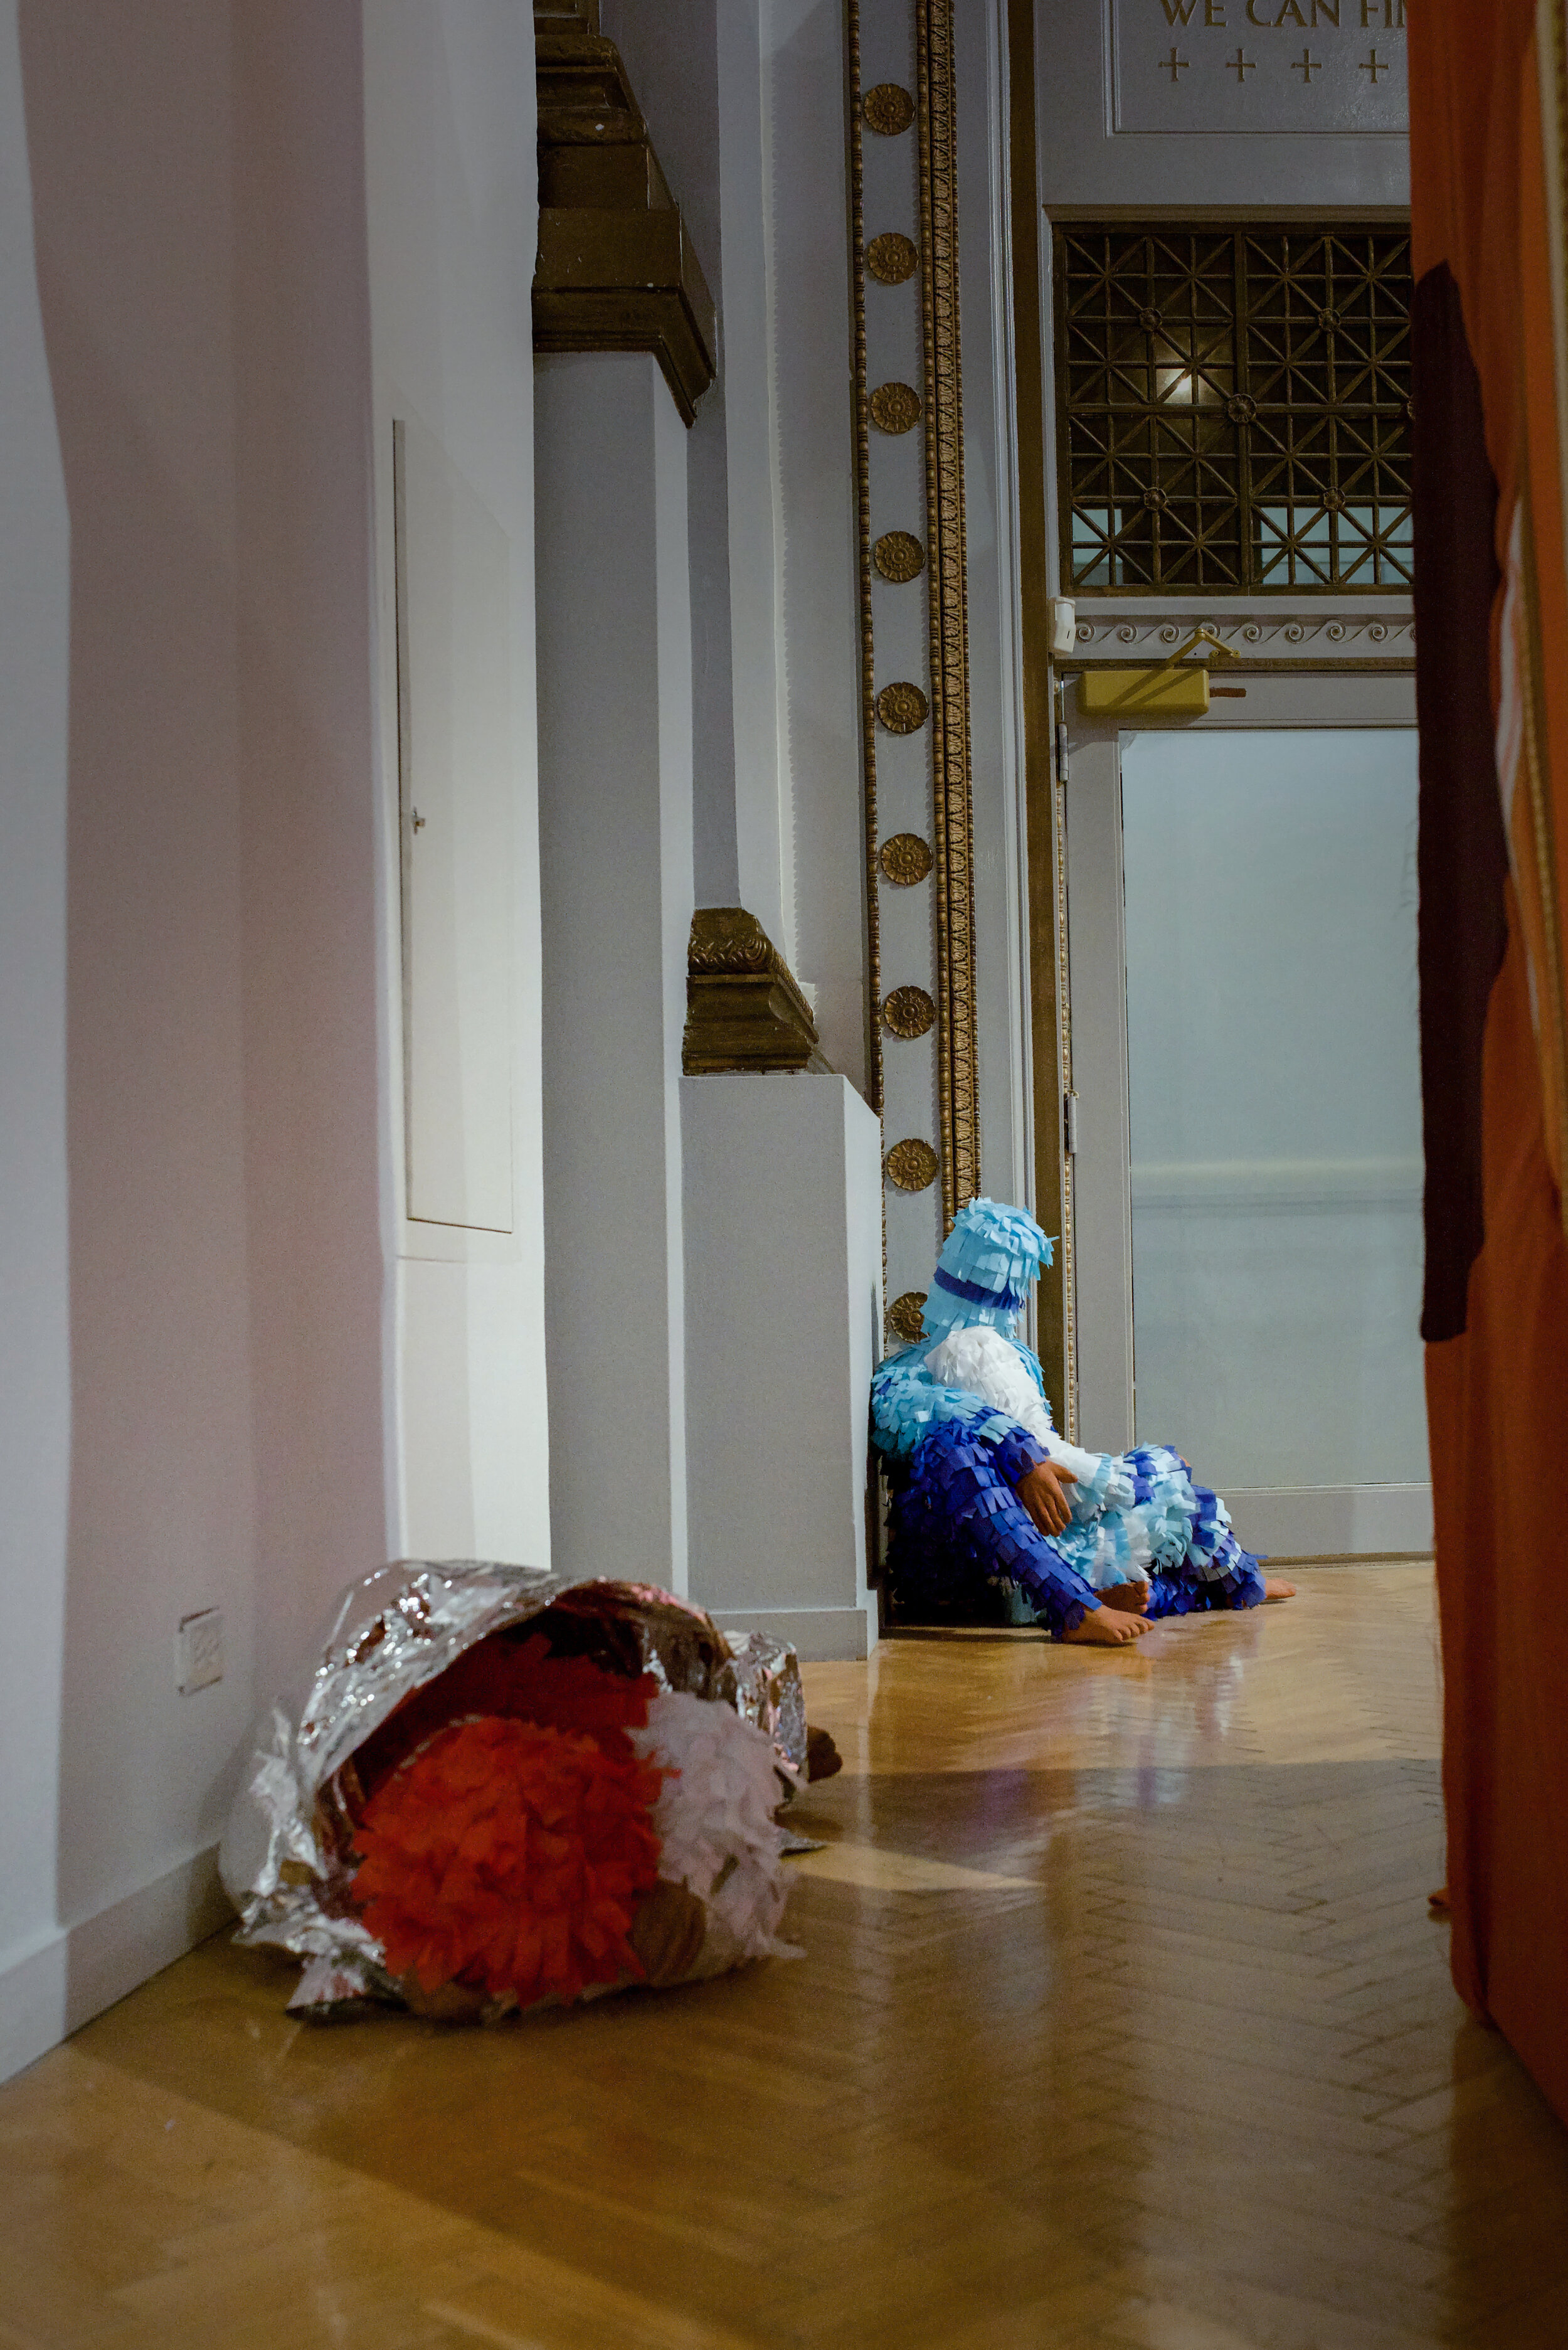  Installation view of work by Moises Salazar – photo by Gloria Arroyo. 